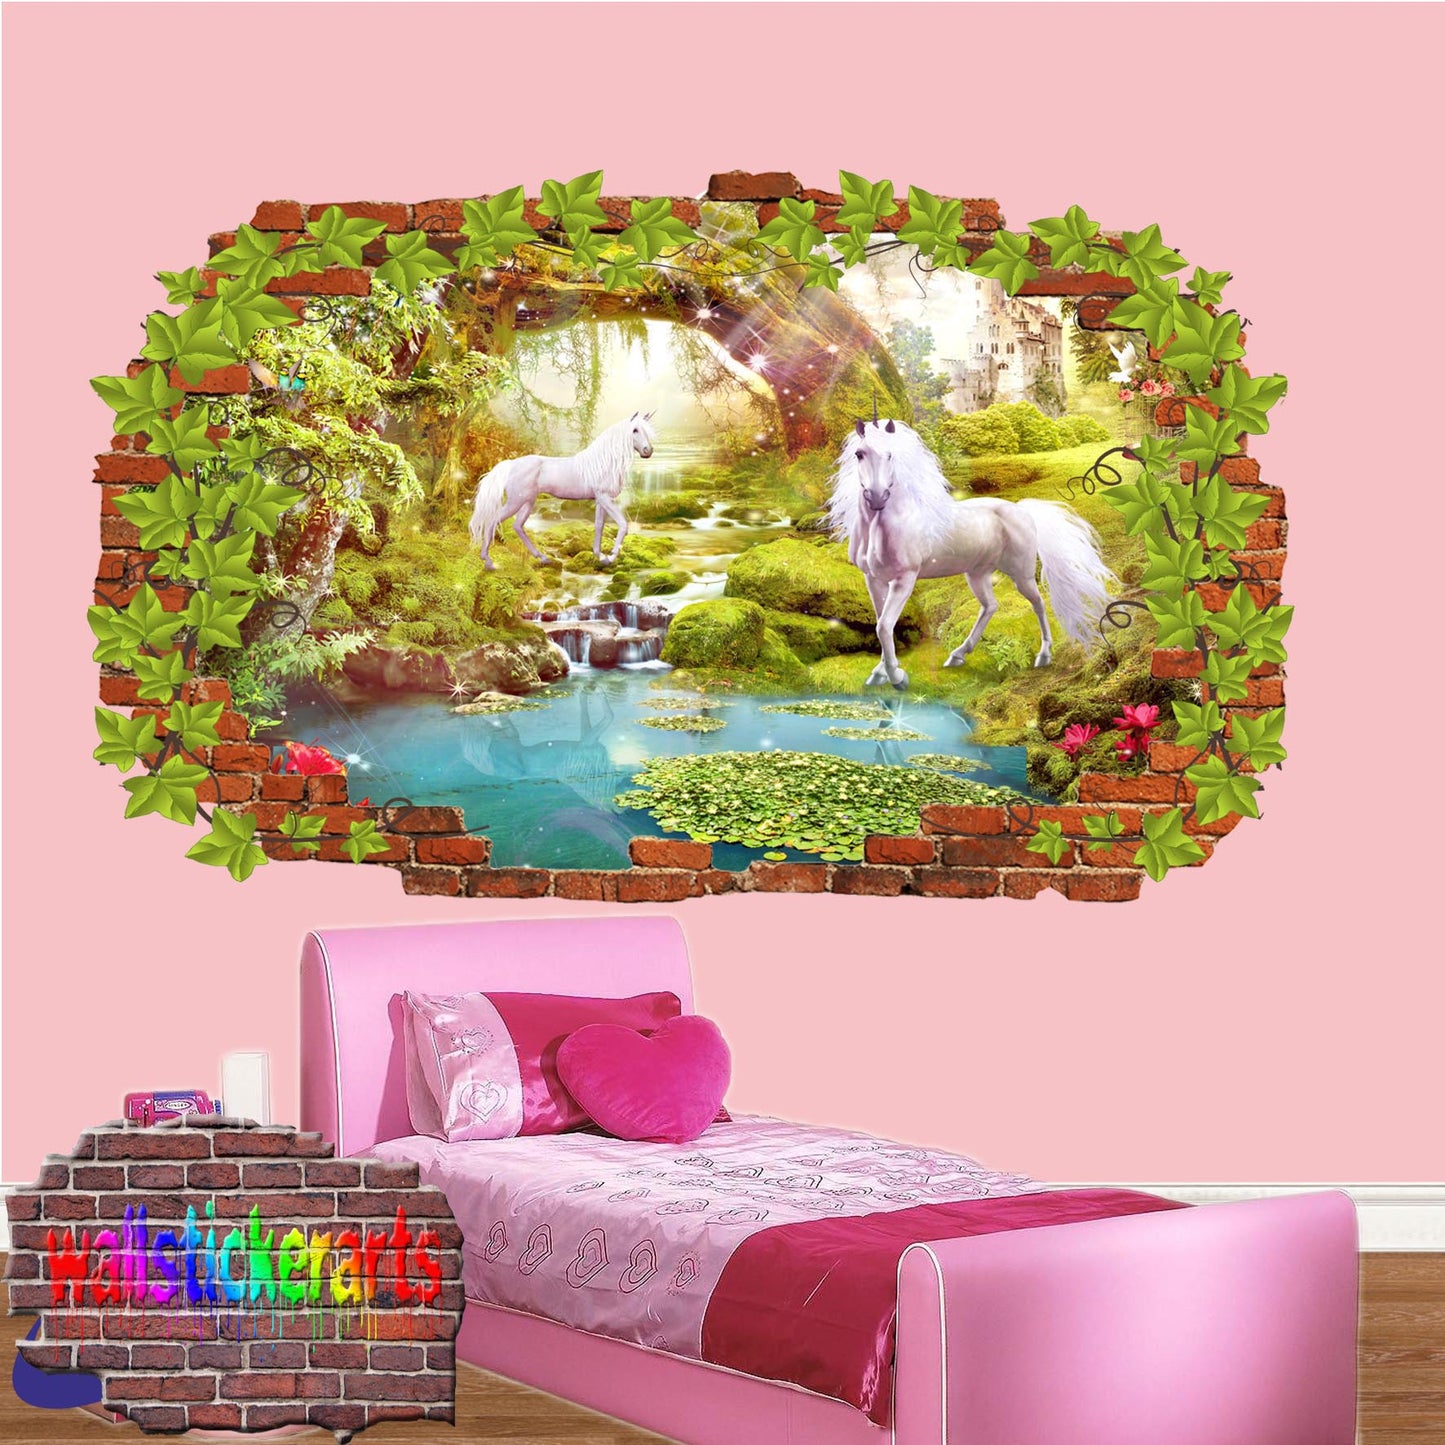 Unicorns Dreamland Forest 3d Ivy Wall Sticker Girls Room Decoration Decal Mural